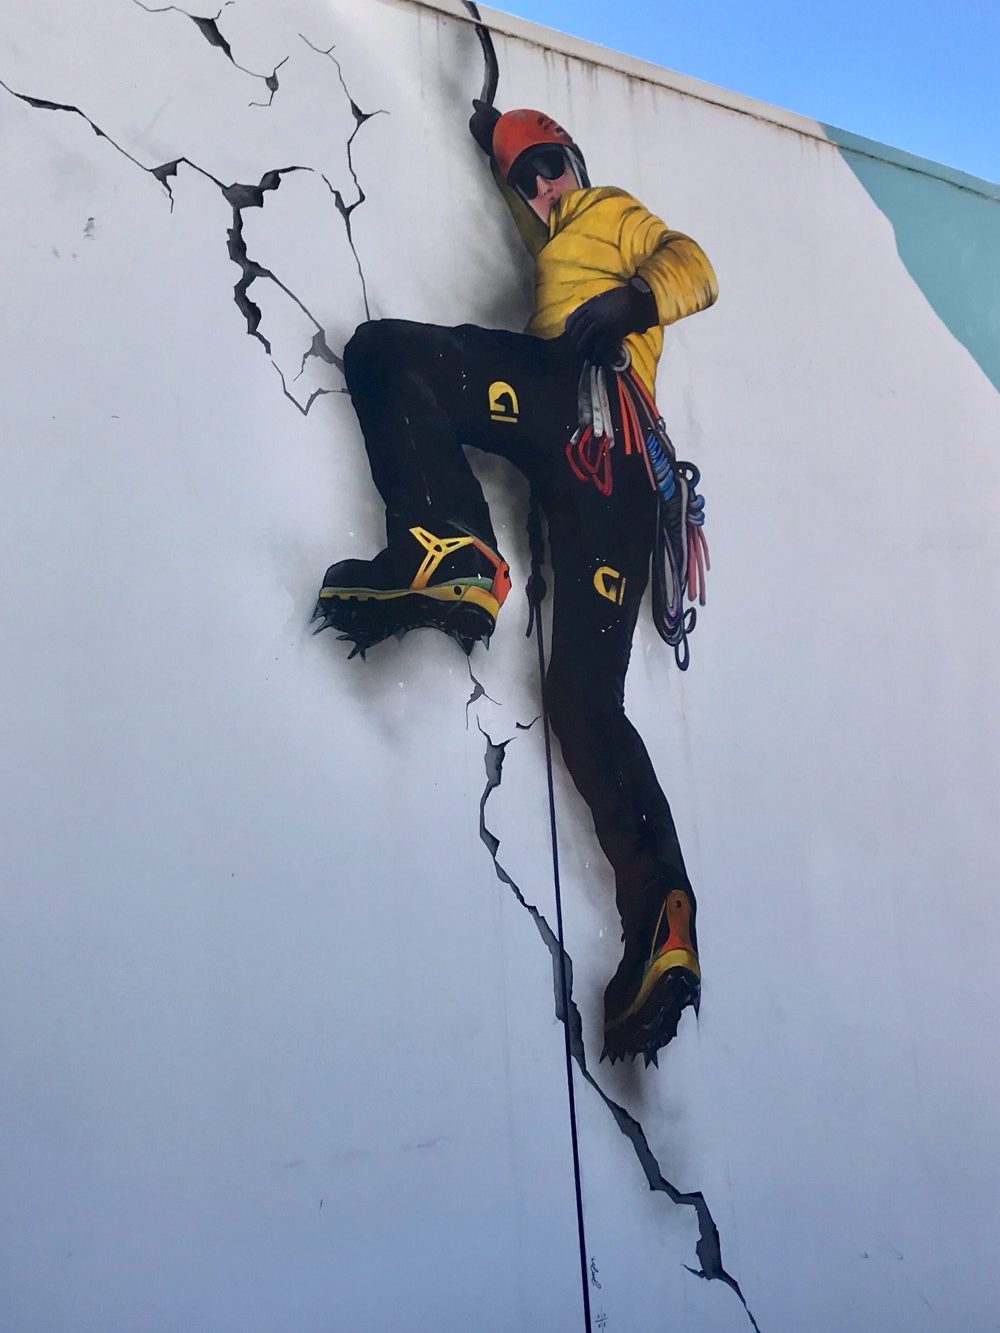 This amazing painting was on a wall by a petrol station, incredibly lifelike